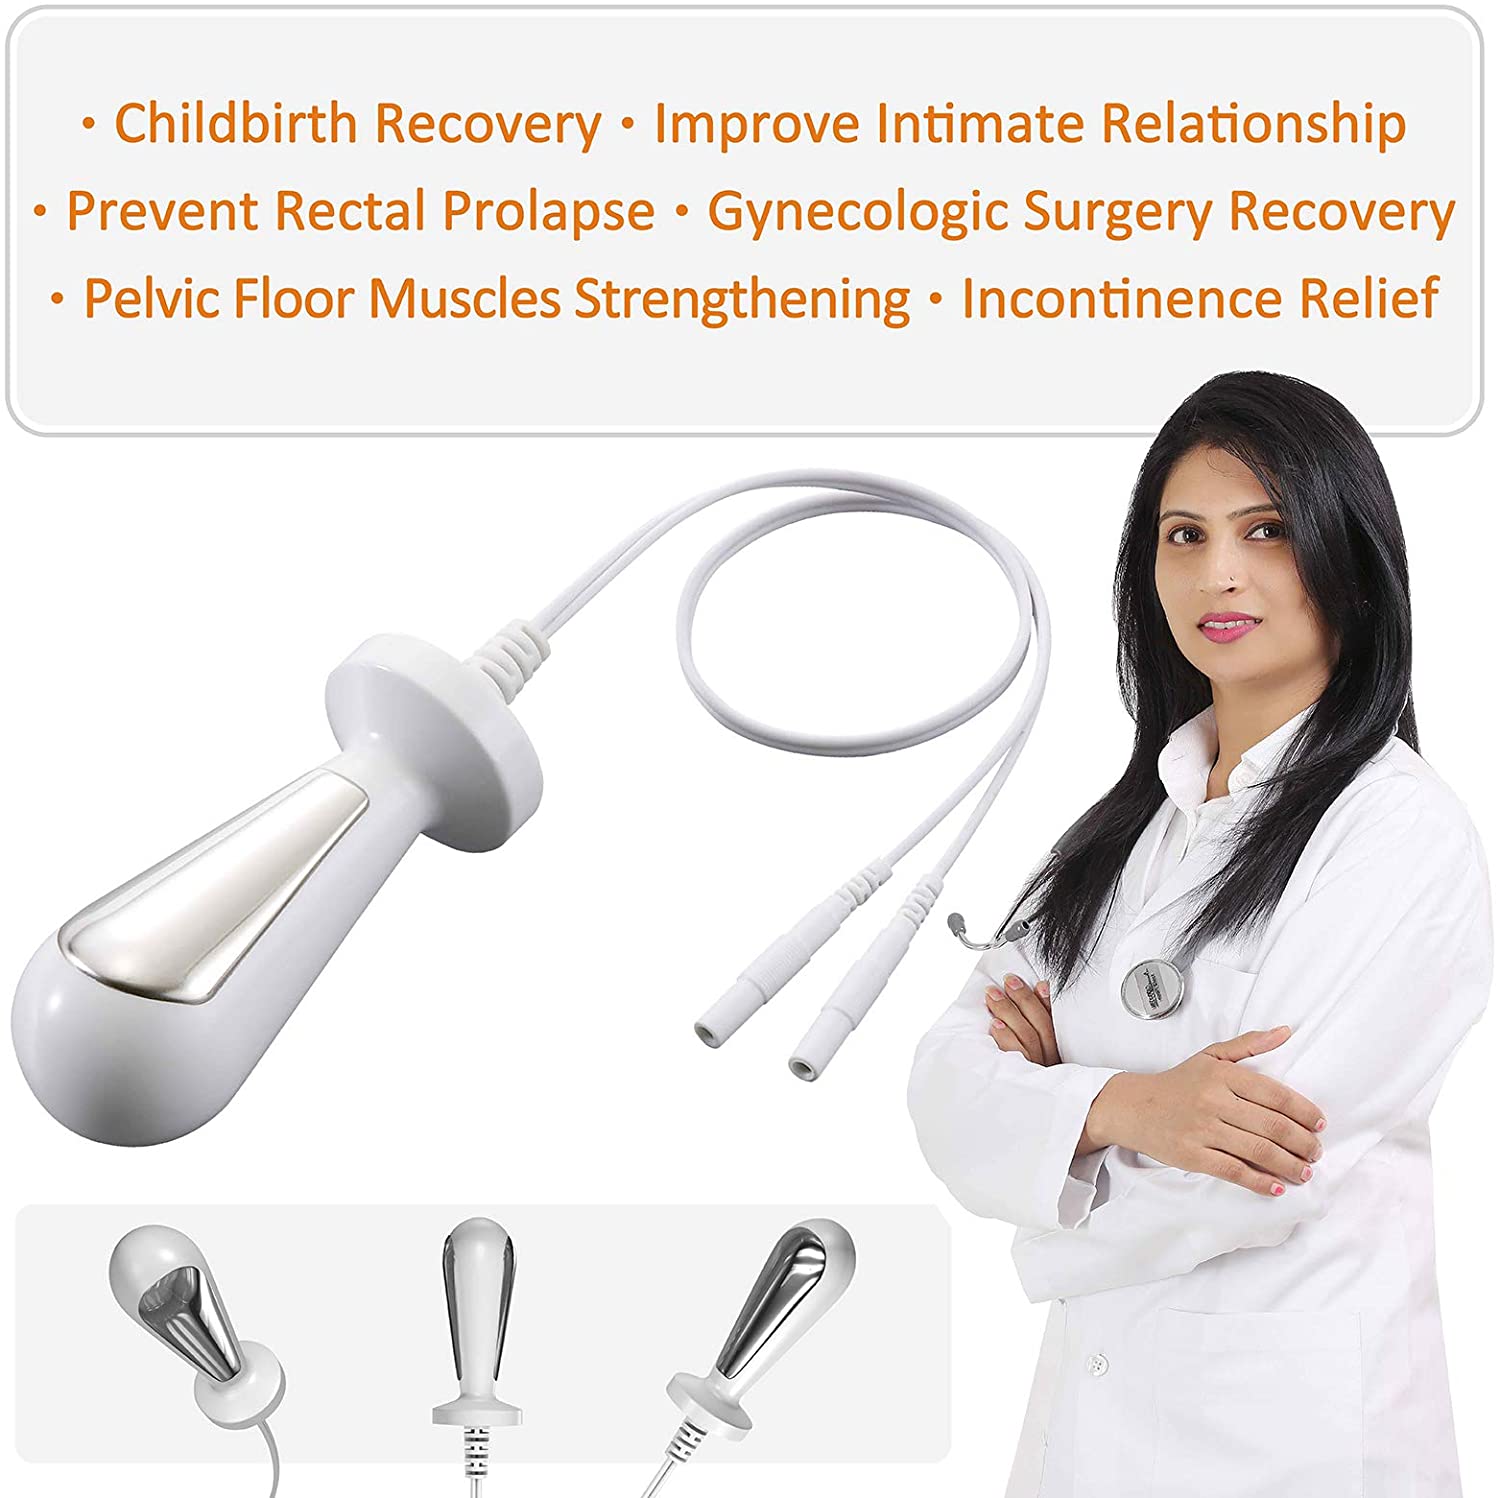 iSTIM Probe for Kegel Exercise, Pelvic Floor Electrical Muscle Stimulation, Incontinence